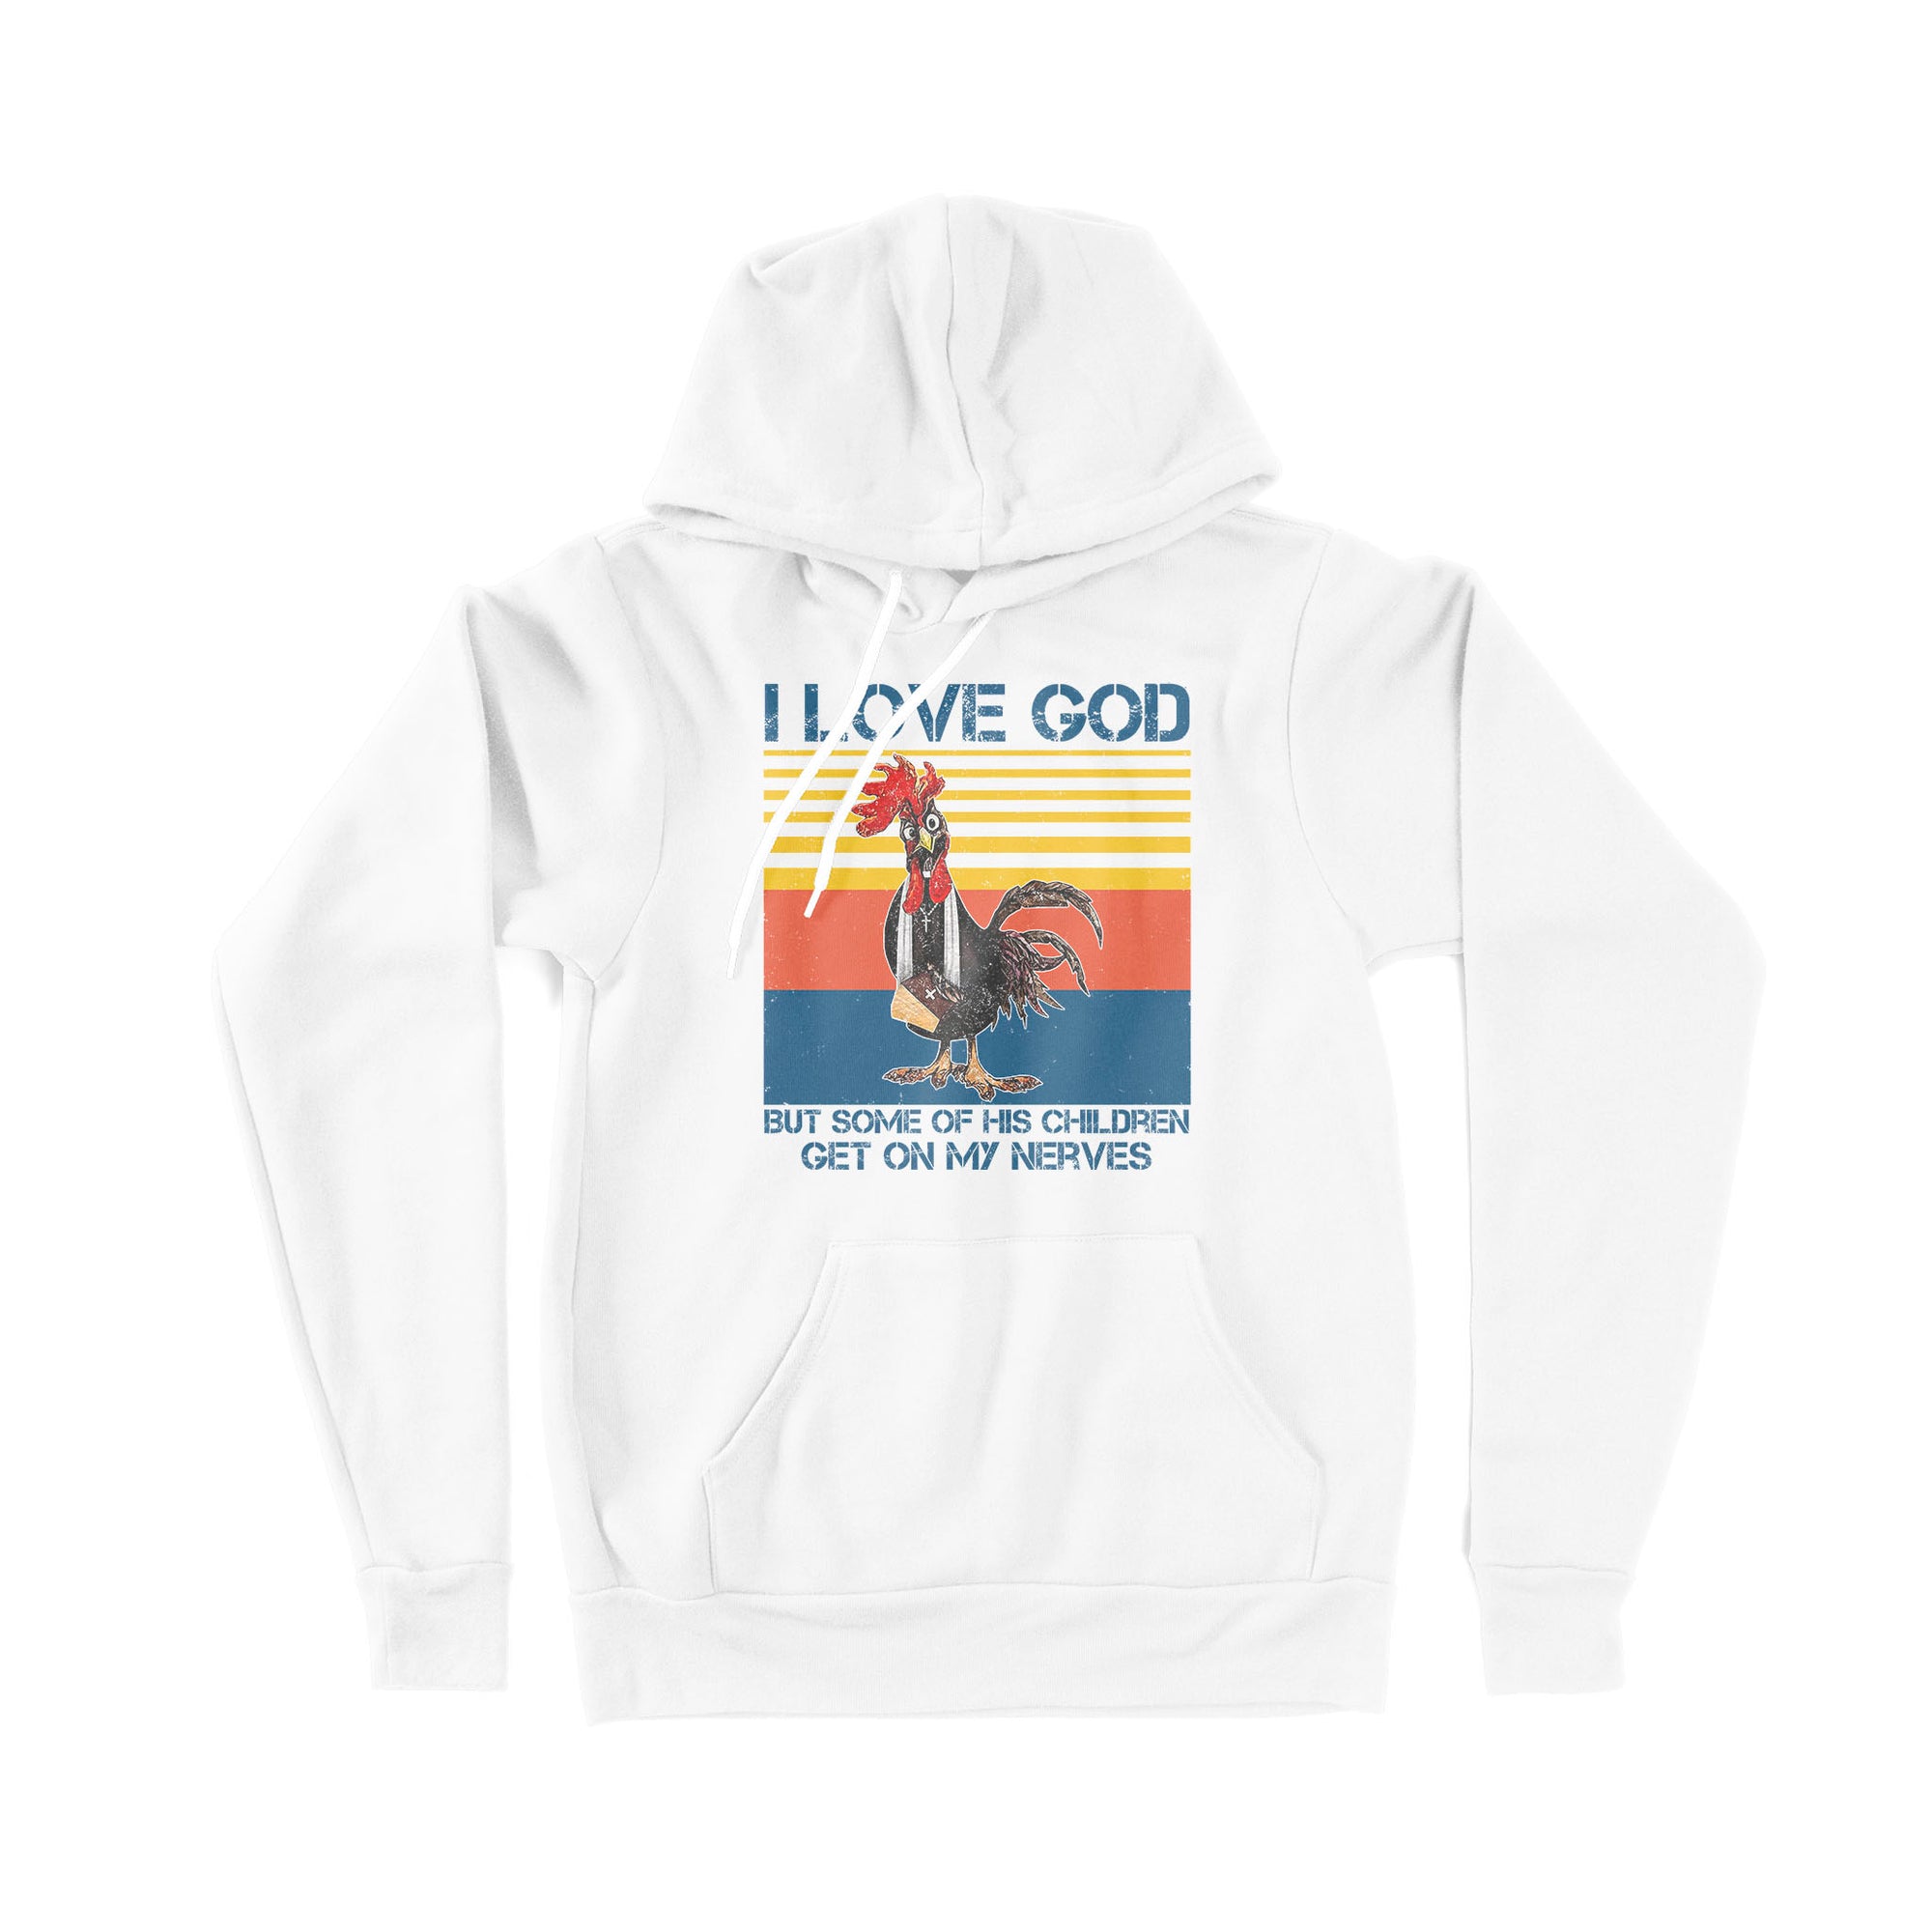 I Love God But Some Of His Children Get On My Nerves - Premium Hoodie